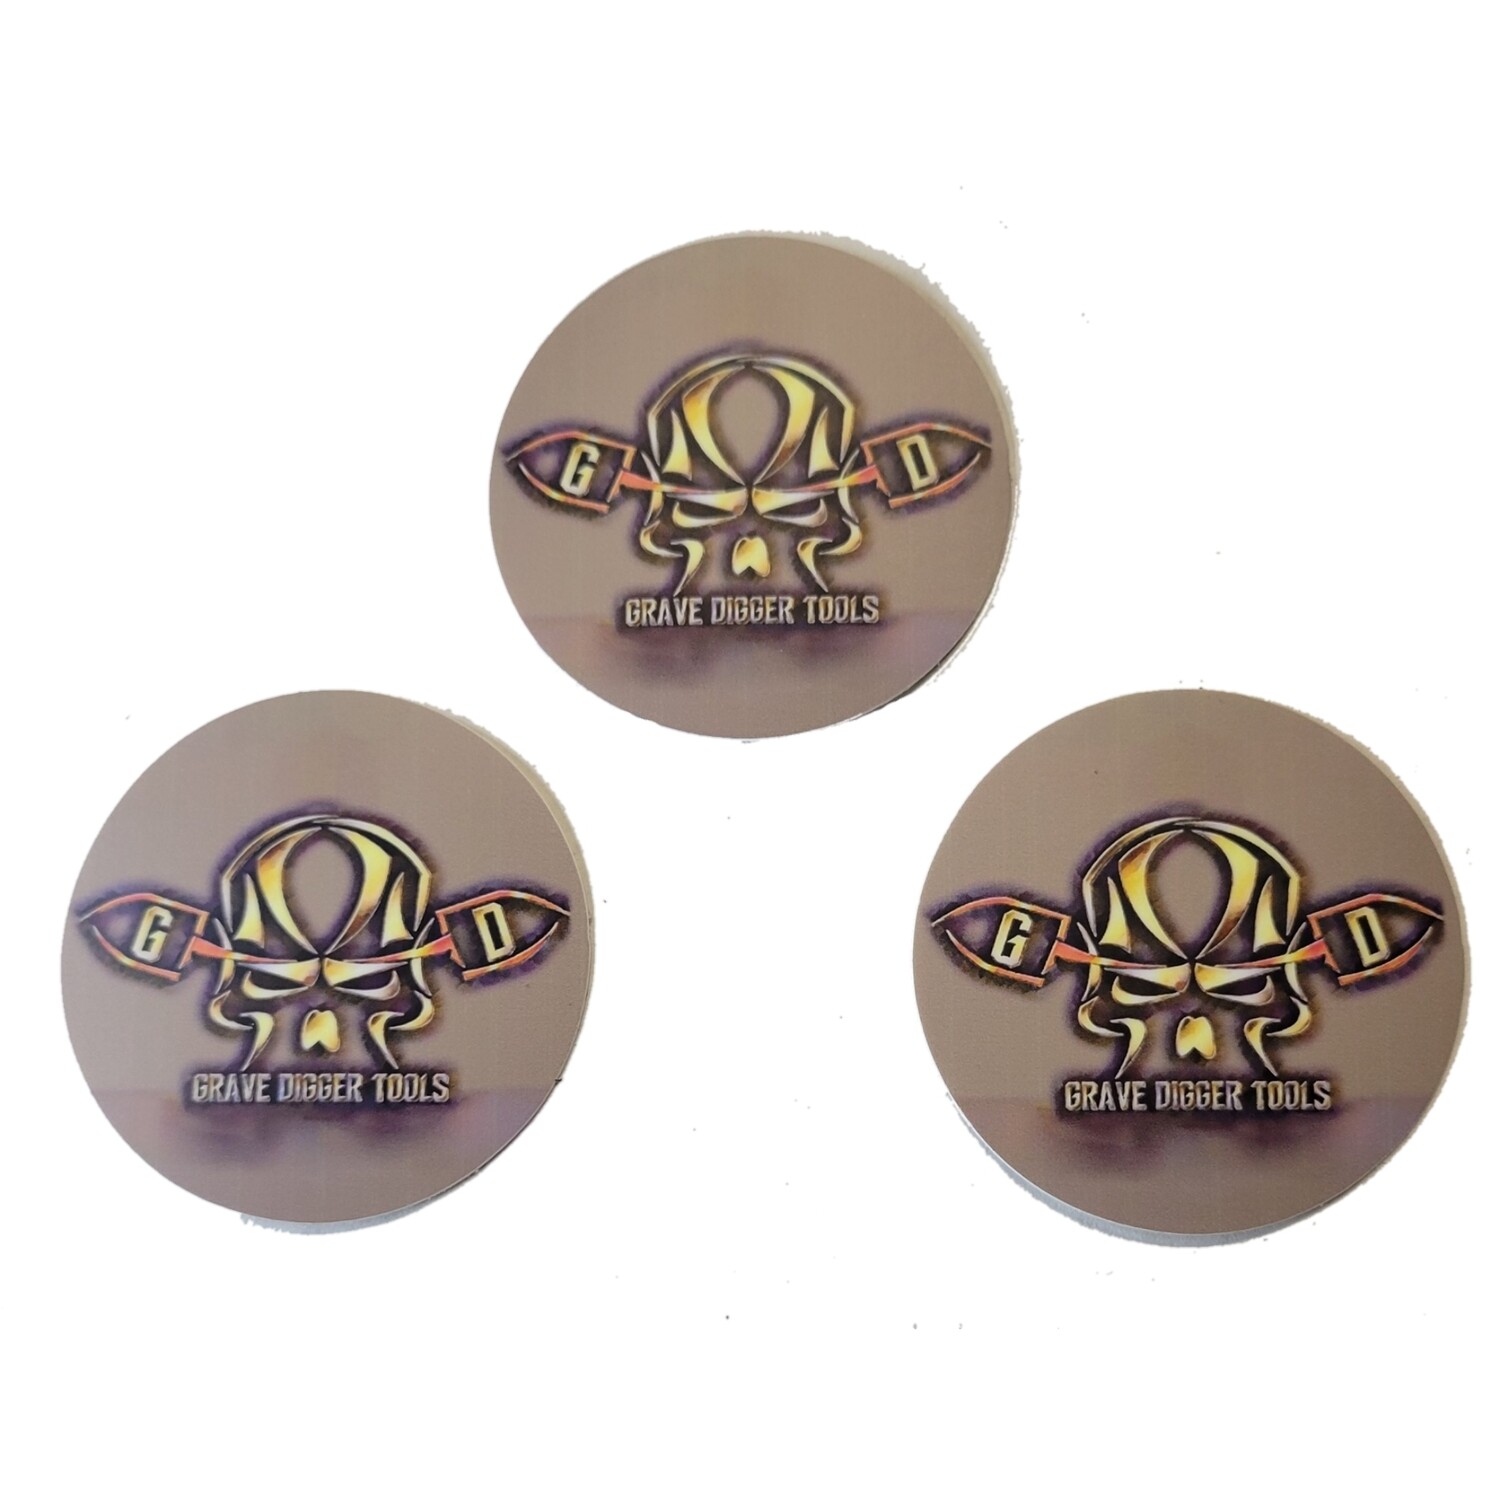 3 Grave Digger Tools 2" round vinyl stickers